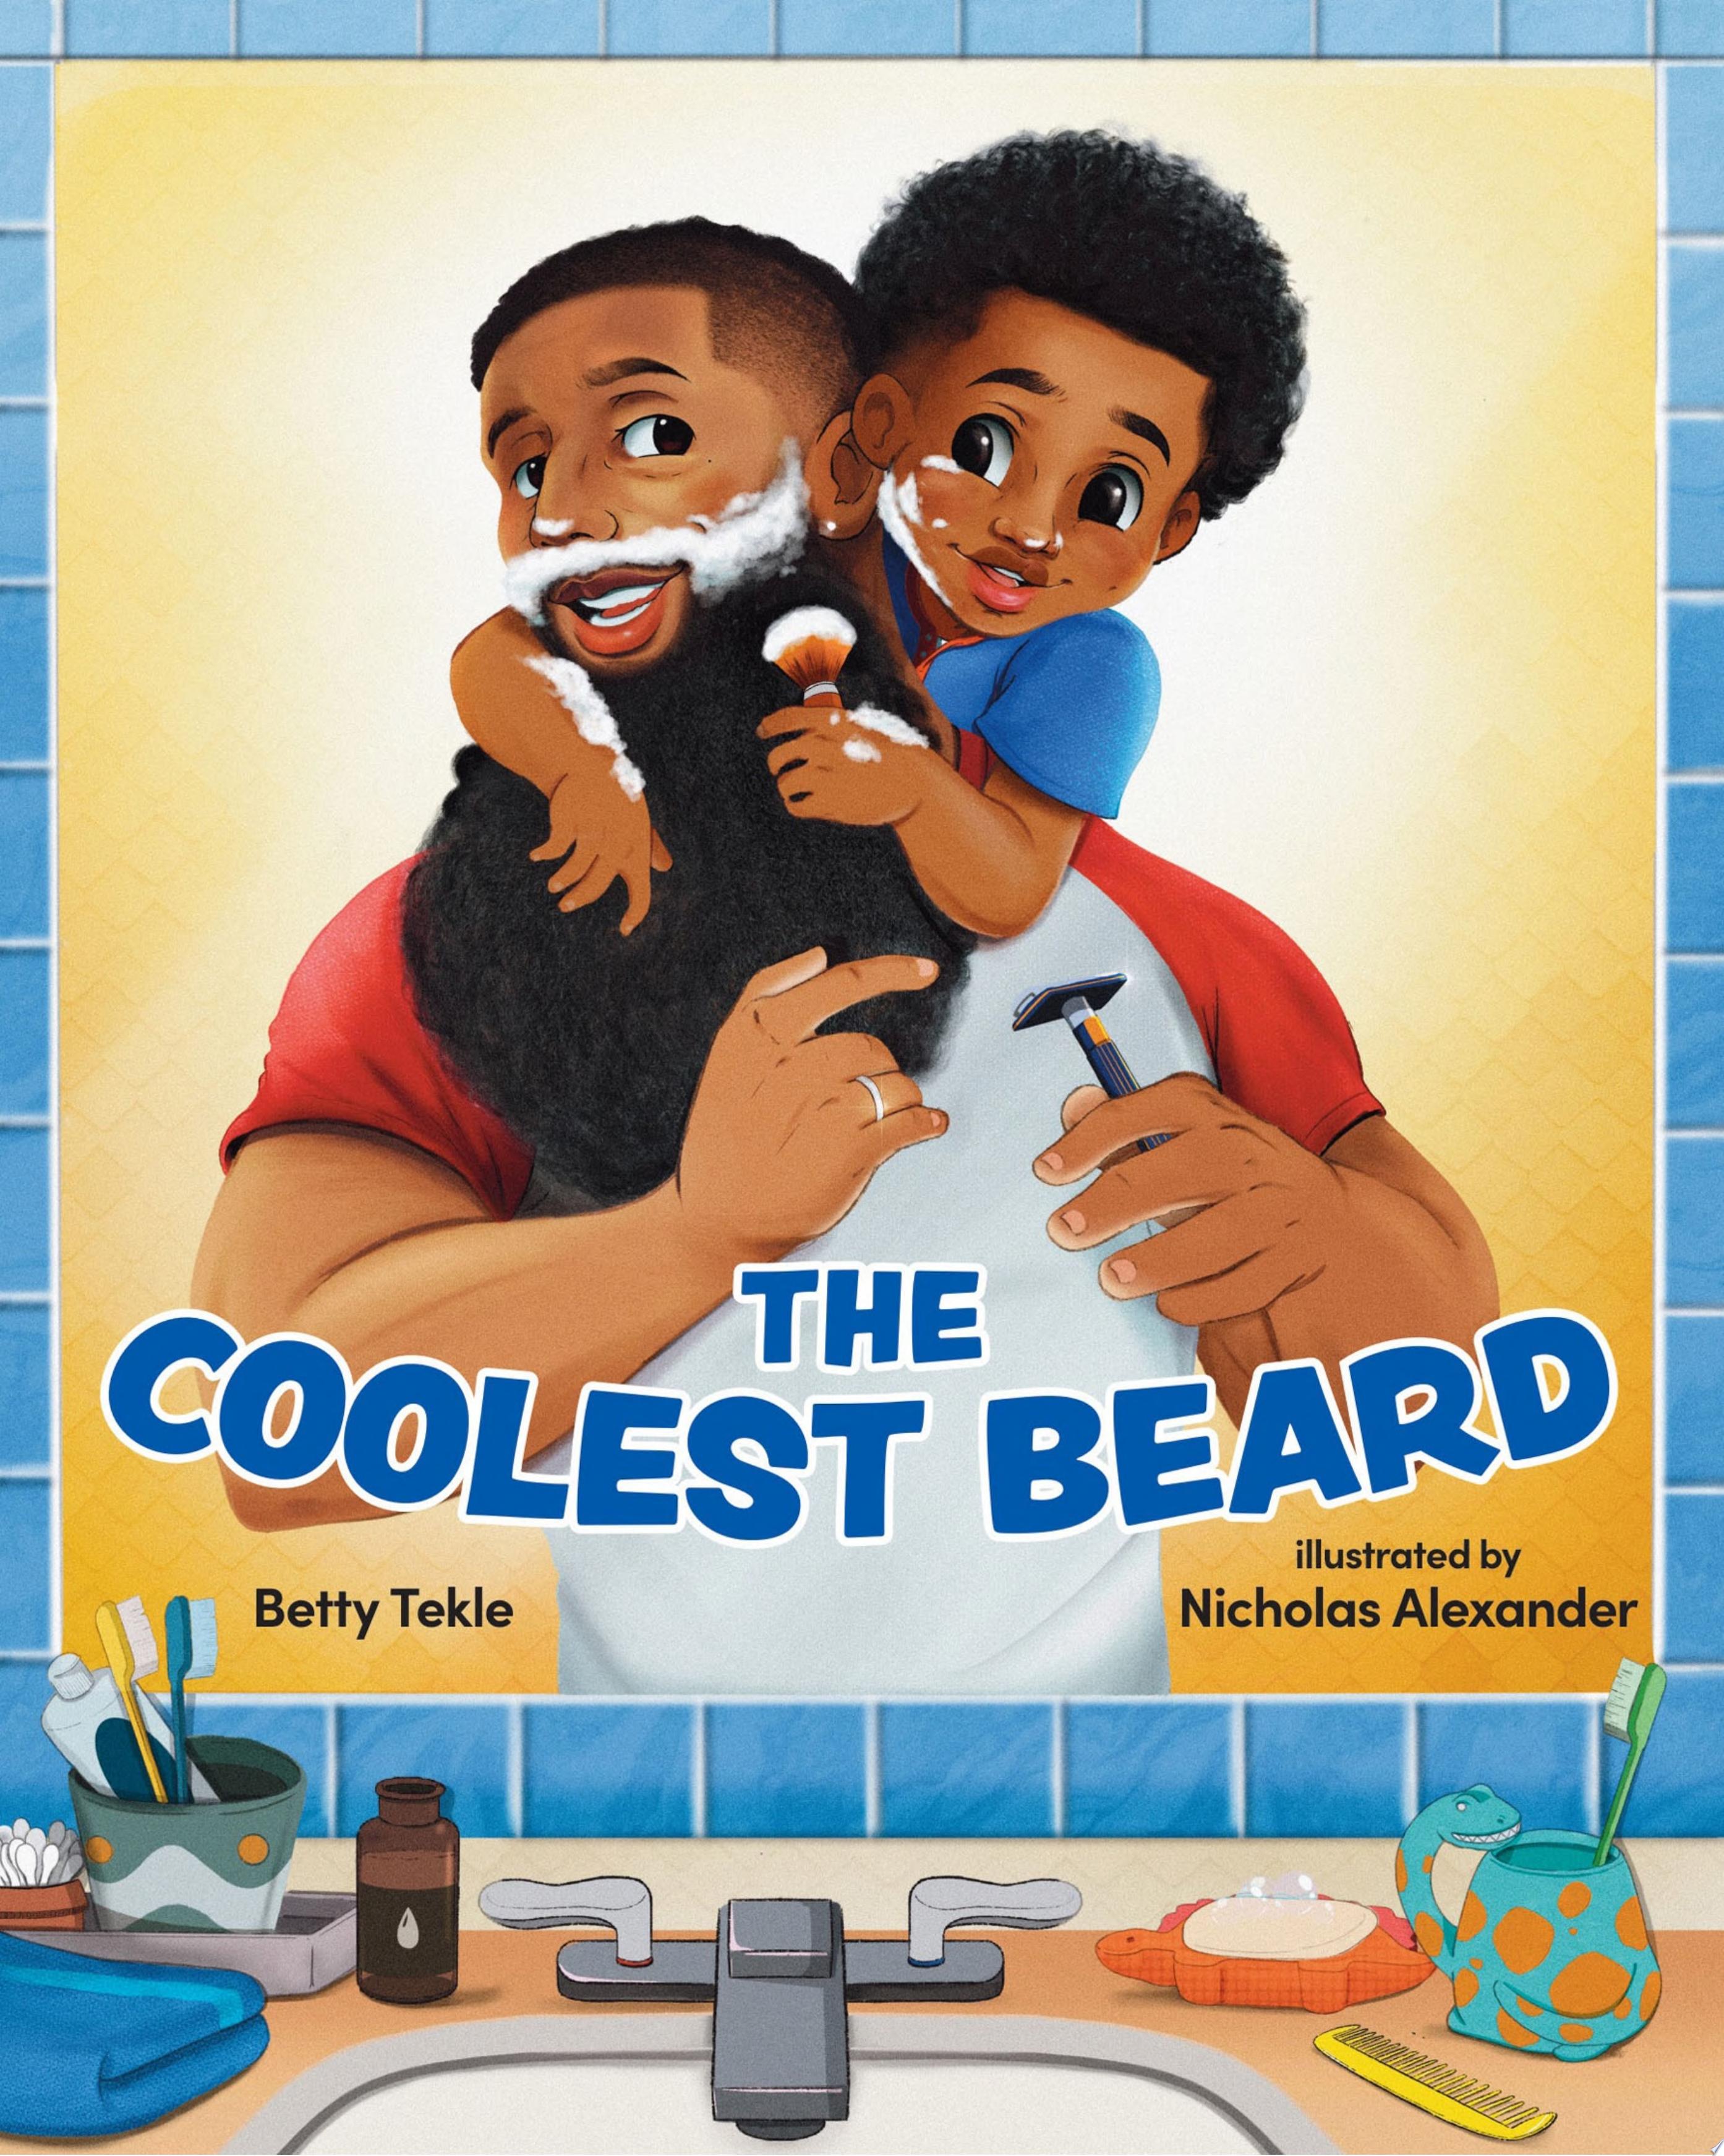 Image for "The Coolest Beard"